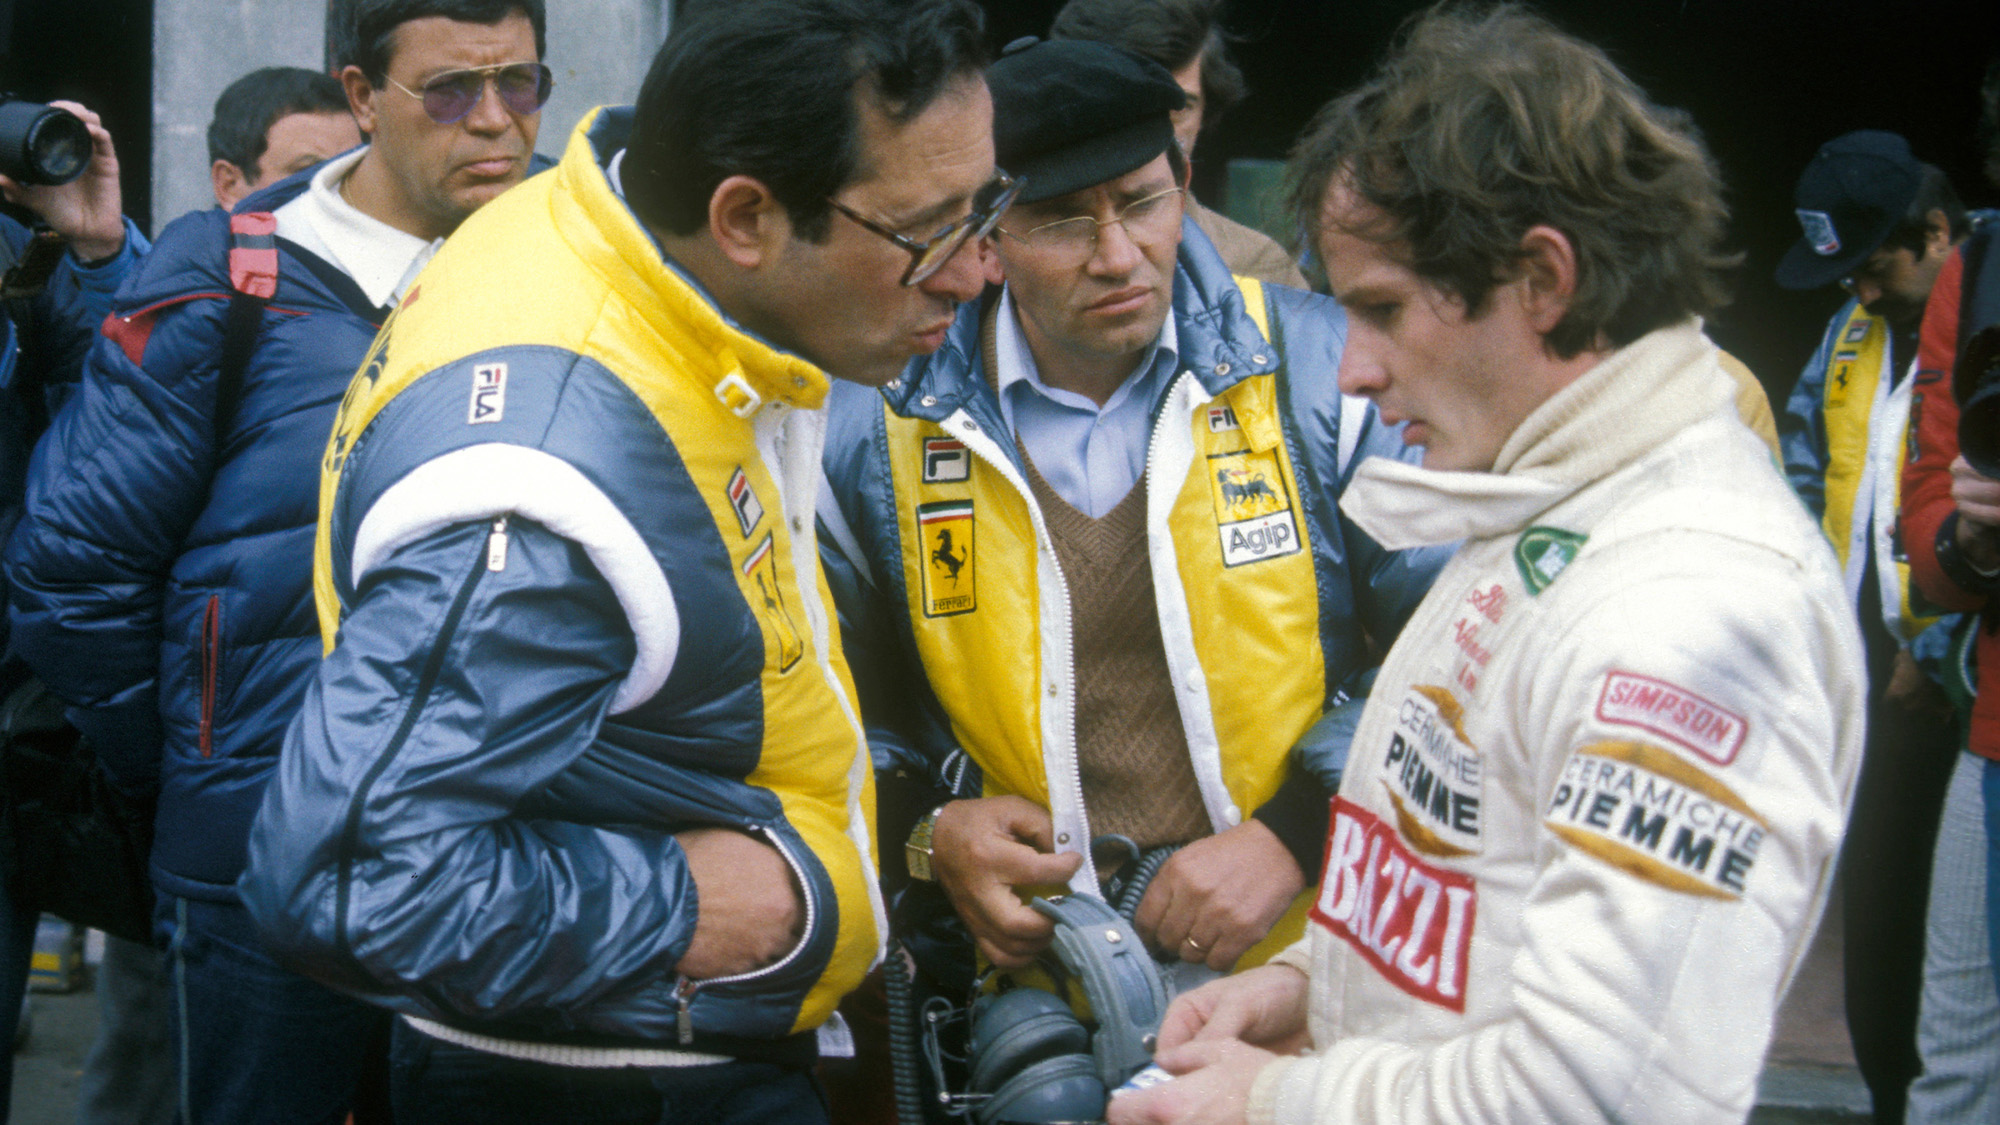 Ferrari team boss Forghieri (left) with a preoccupied Villeneuve before qualifying at Zolder for the 1982 Belgian Grand Prix.